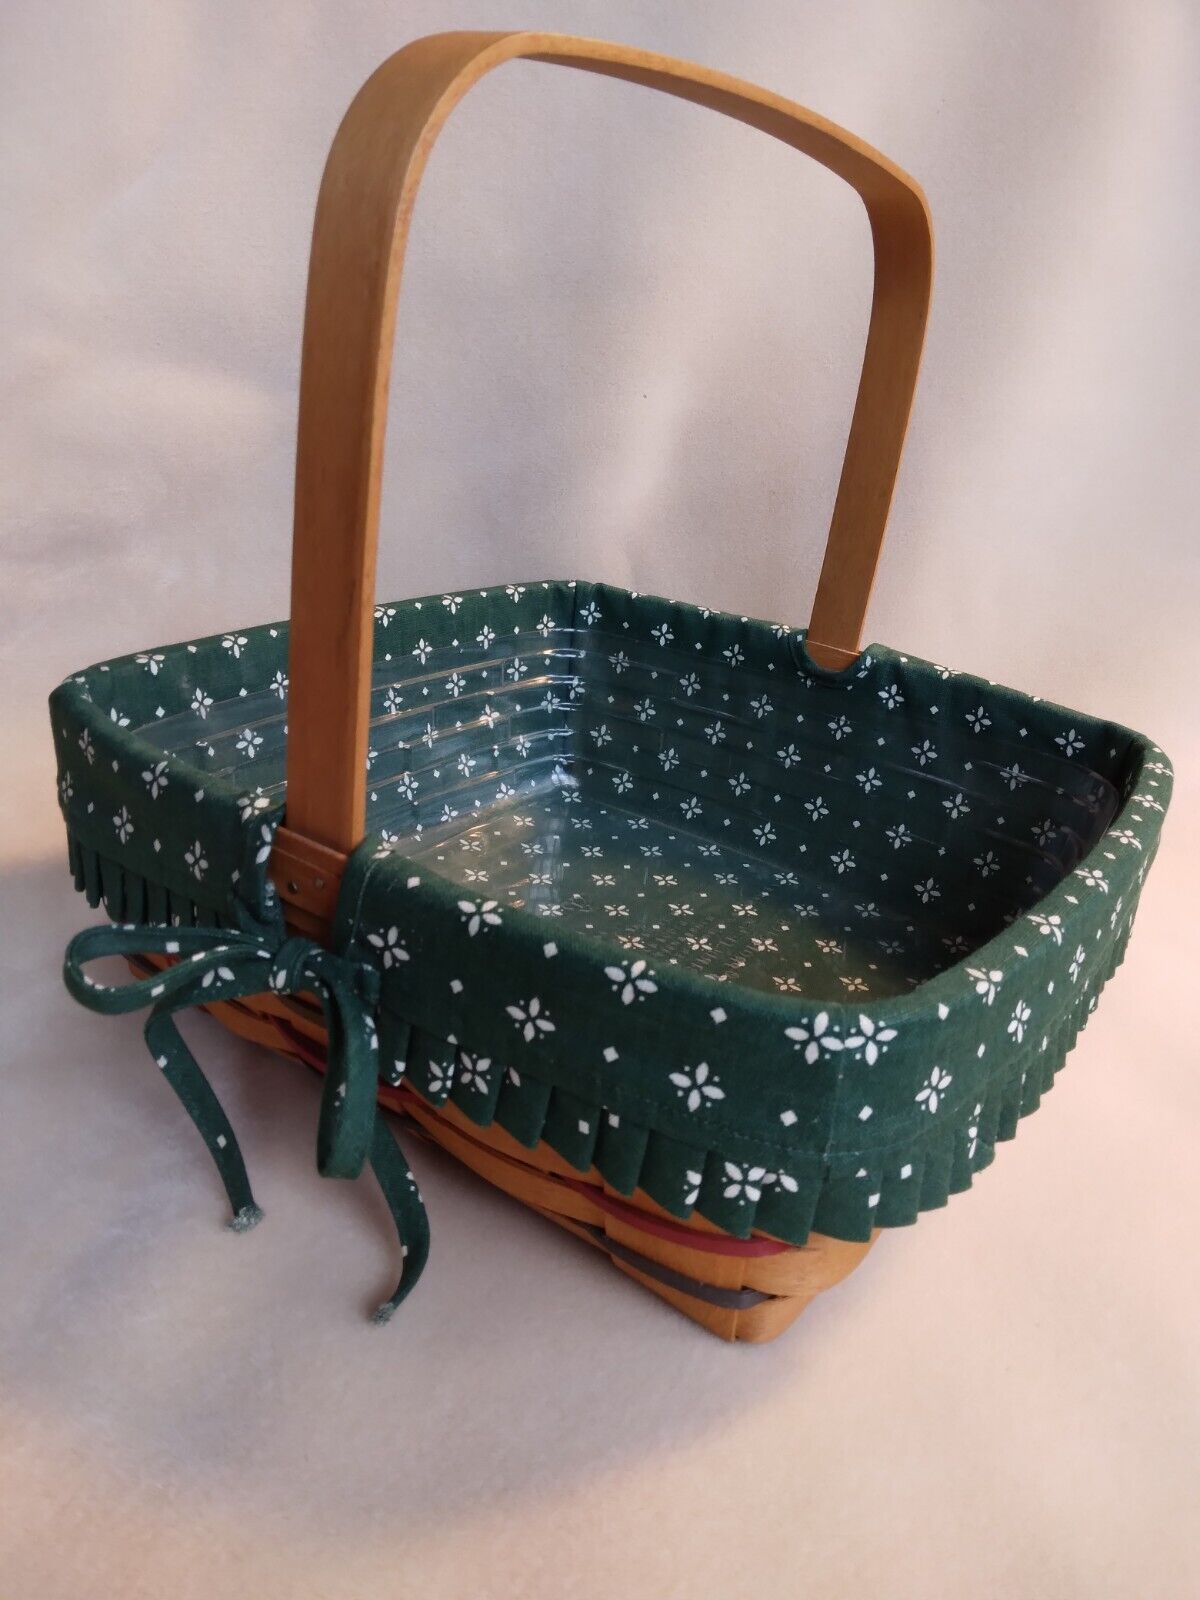 Large Longaberger Basket With Heritage Green Liner  Plastic Insert Country Decor